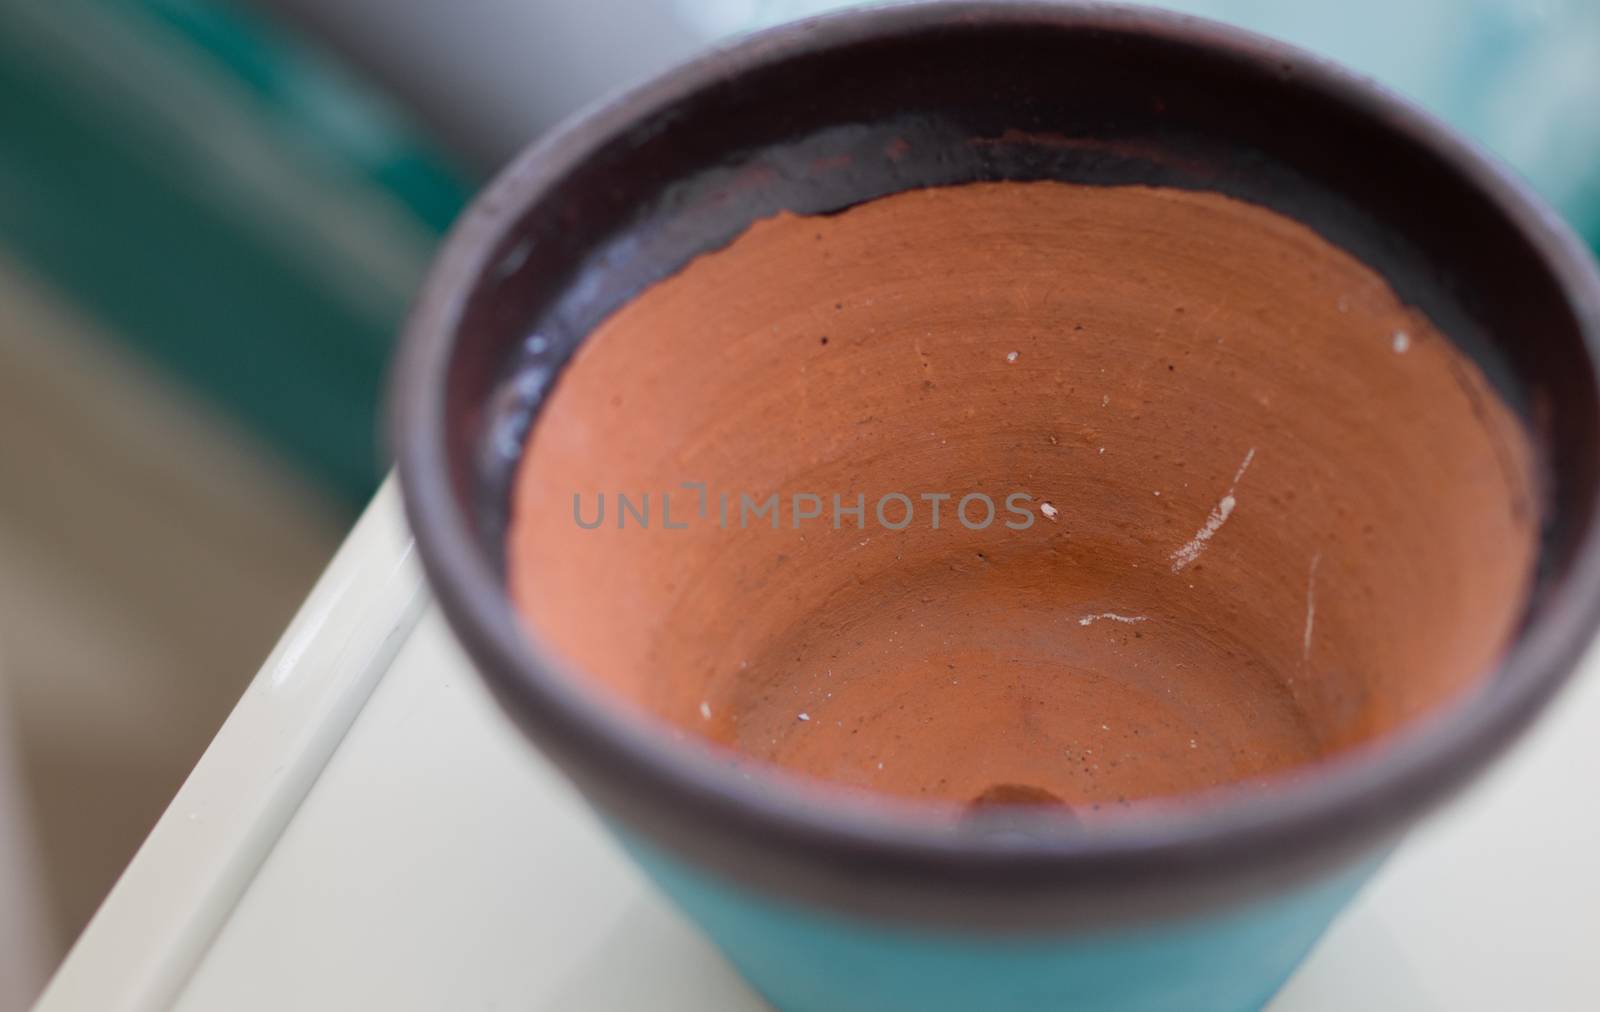 COLOR PHOTO OF CLOSE-UP OF CLAY POT TEXTURE